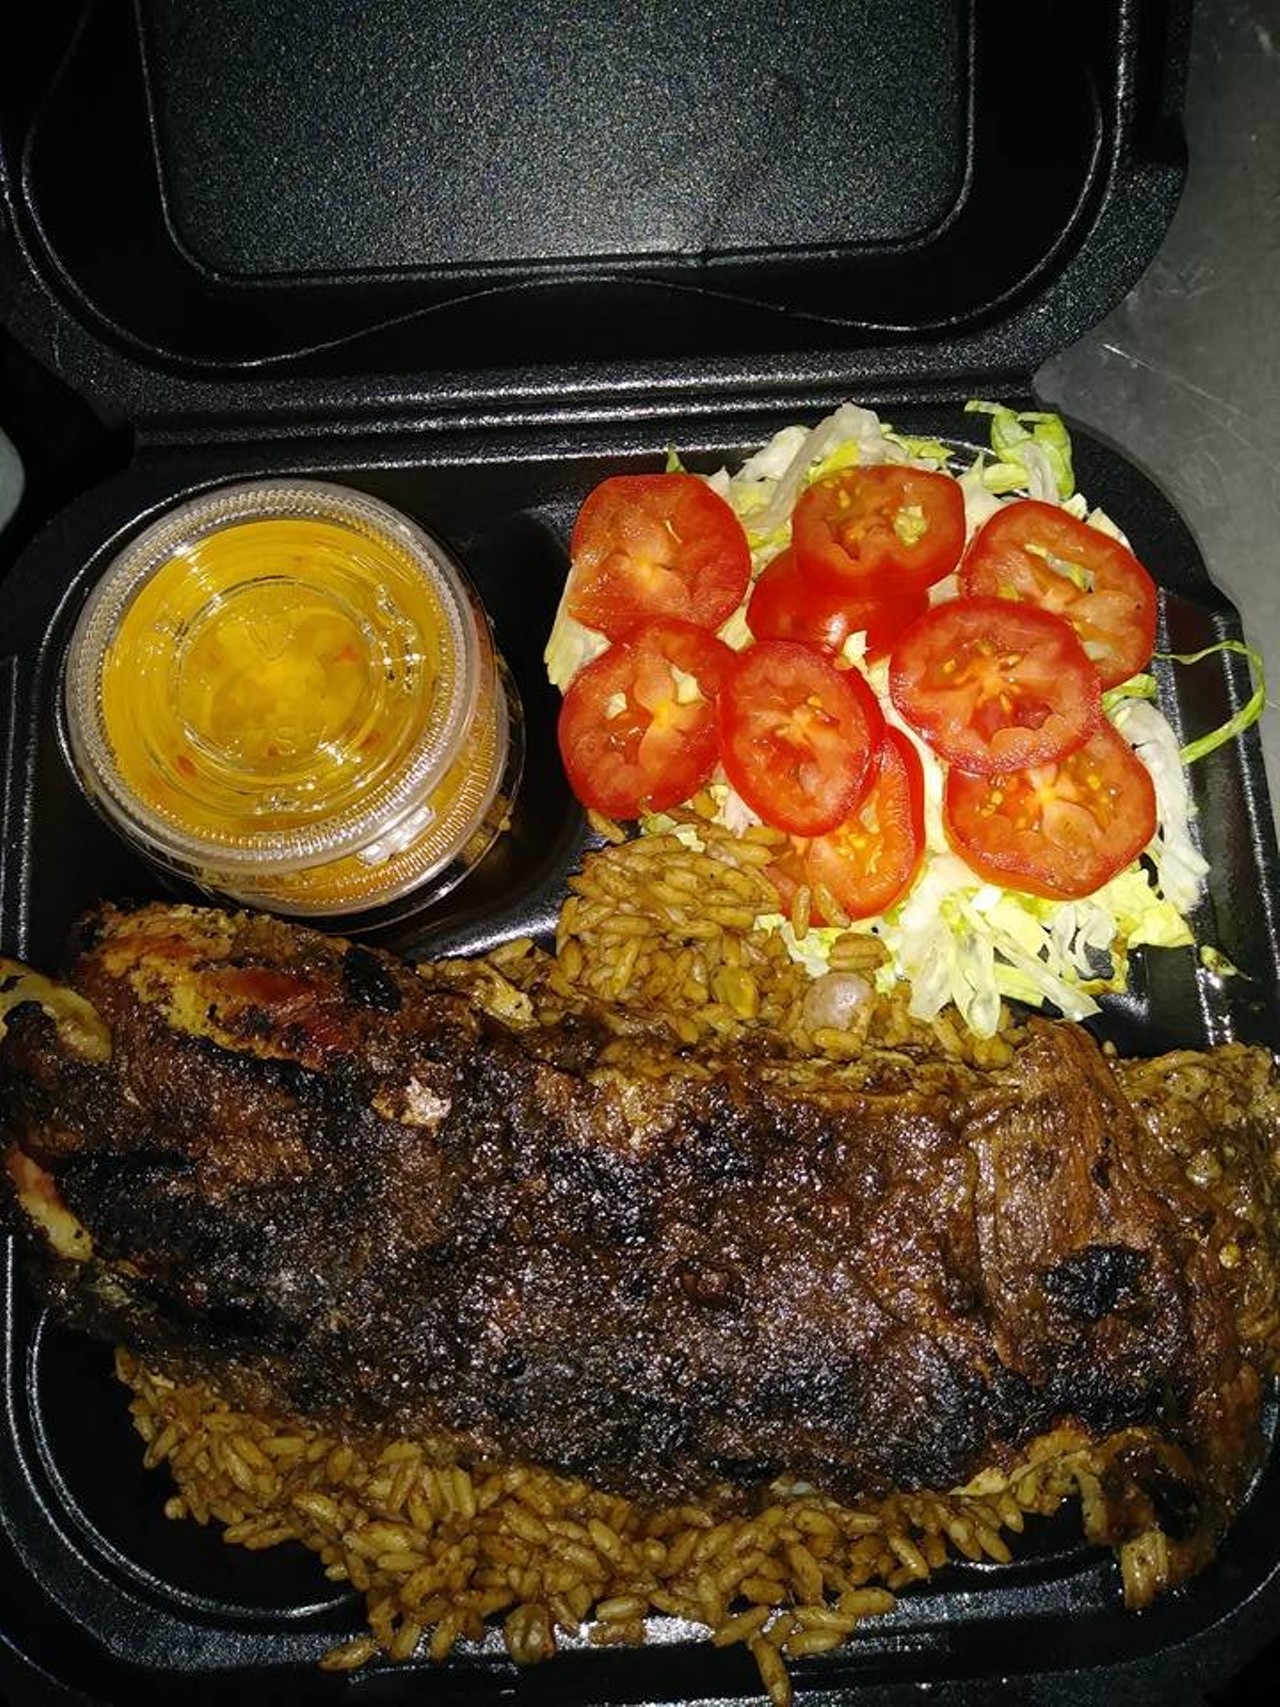 Rooted Garden 
419 S Parramore Ave, 321-247-5999
If you&#146;re looking for a deal, the Rooted Garden offers $5 daily specials for its Caribbean soul food. 
Photo via Rooted Garden/Yelp